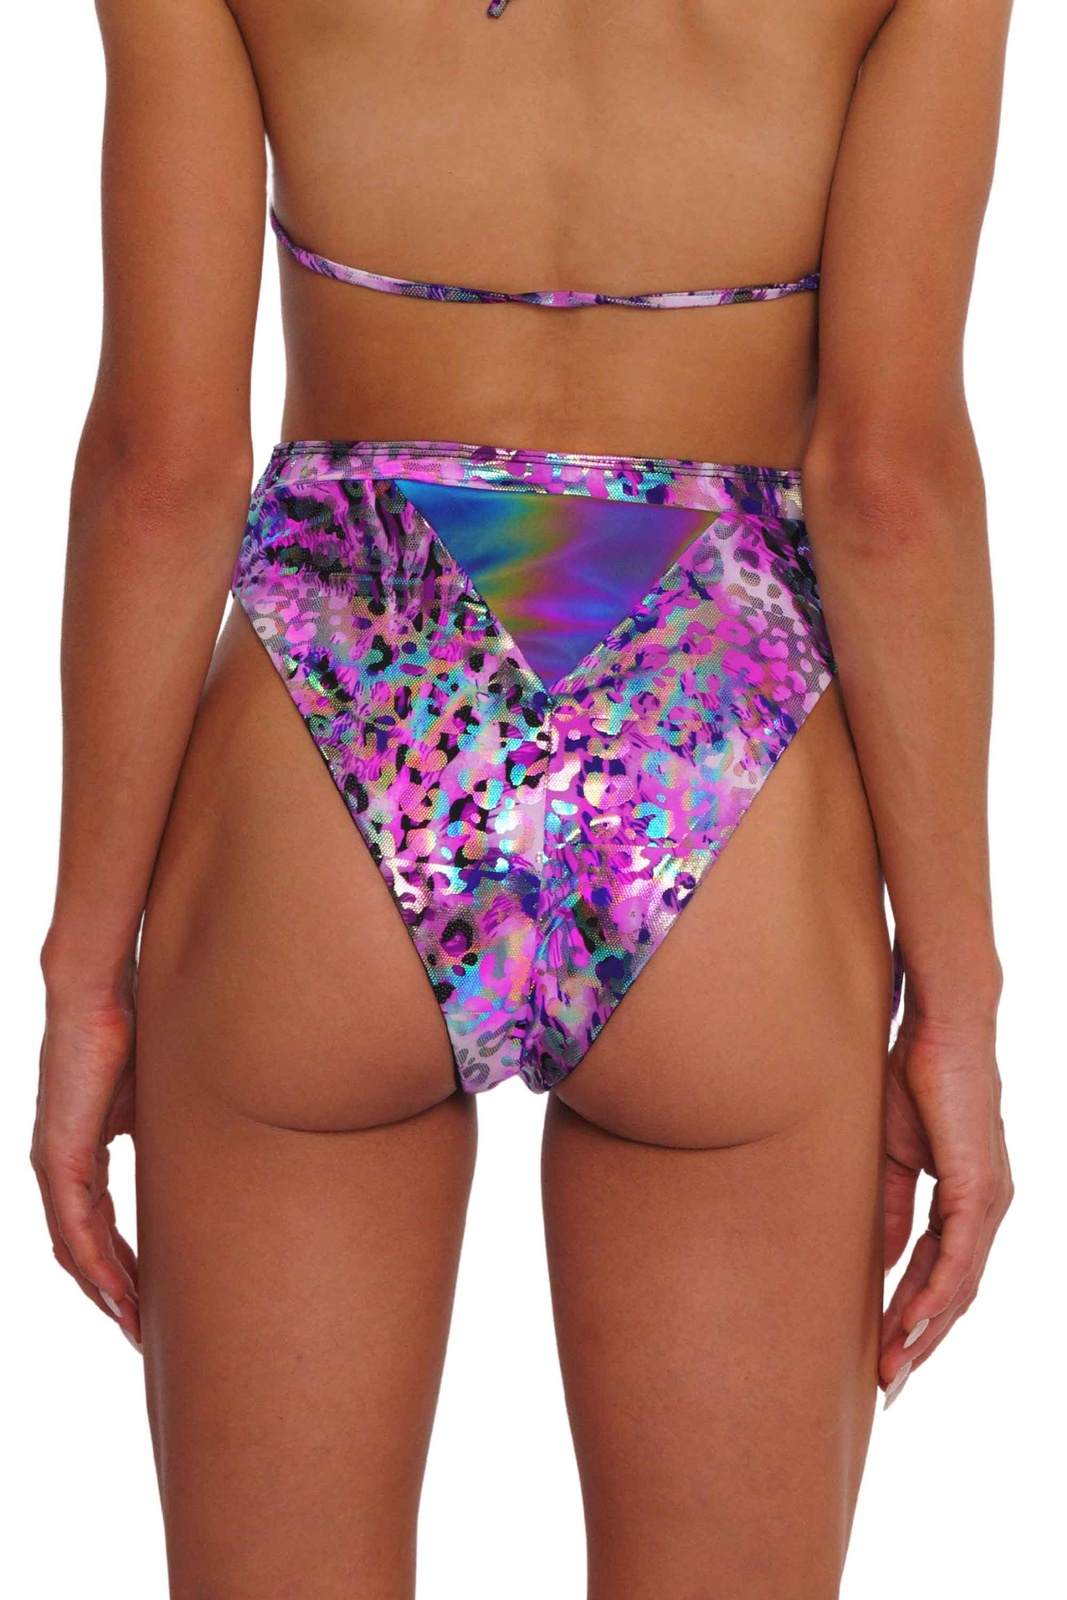 Bliss High Cut Purple Rave bottoms with reflective panel from Love Khaos